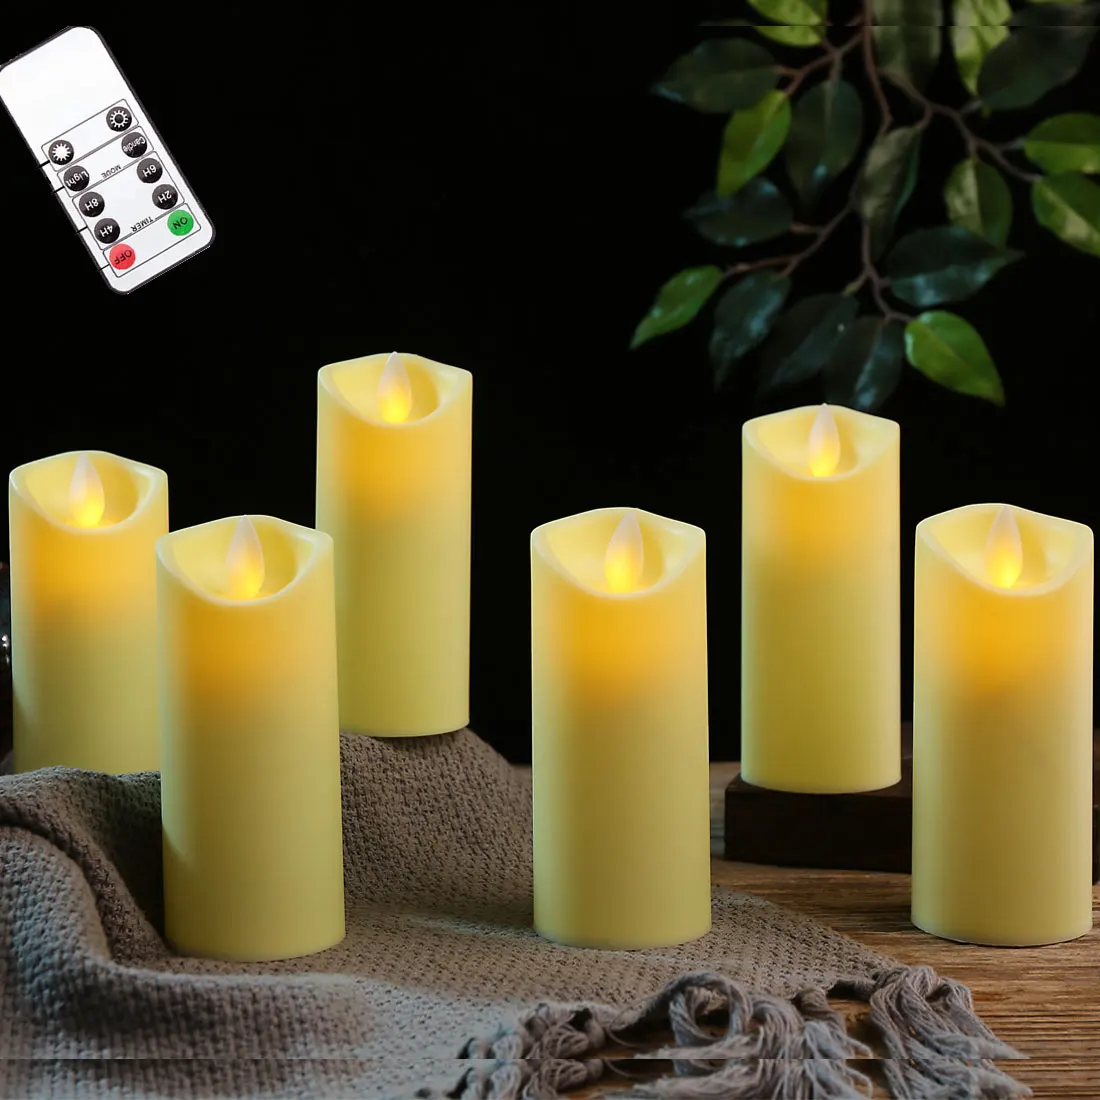 

3/4/5/6 Pieces Remote Control Flameless Moving Wick Led Pillar Candles Battery Candle With Flickering Flame for home party decor